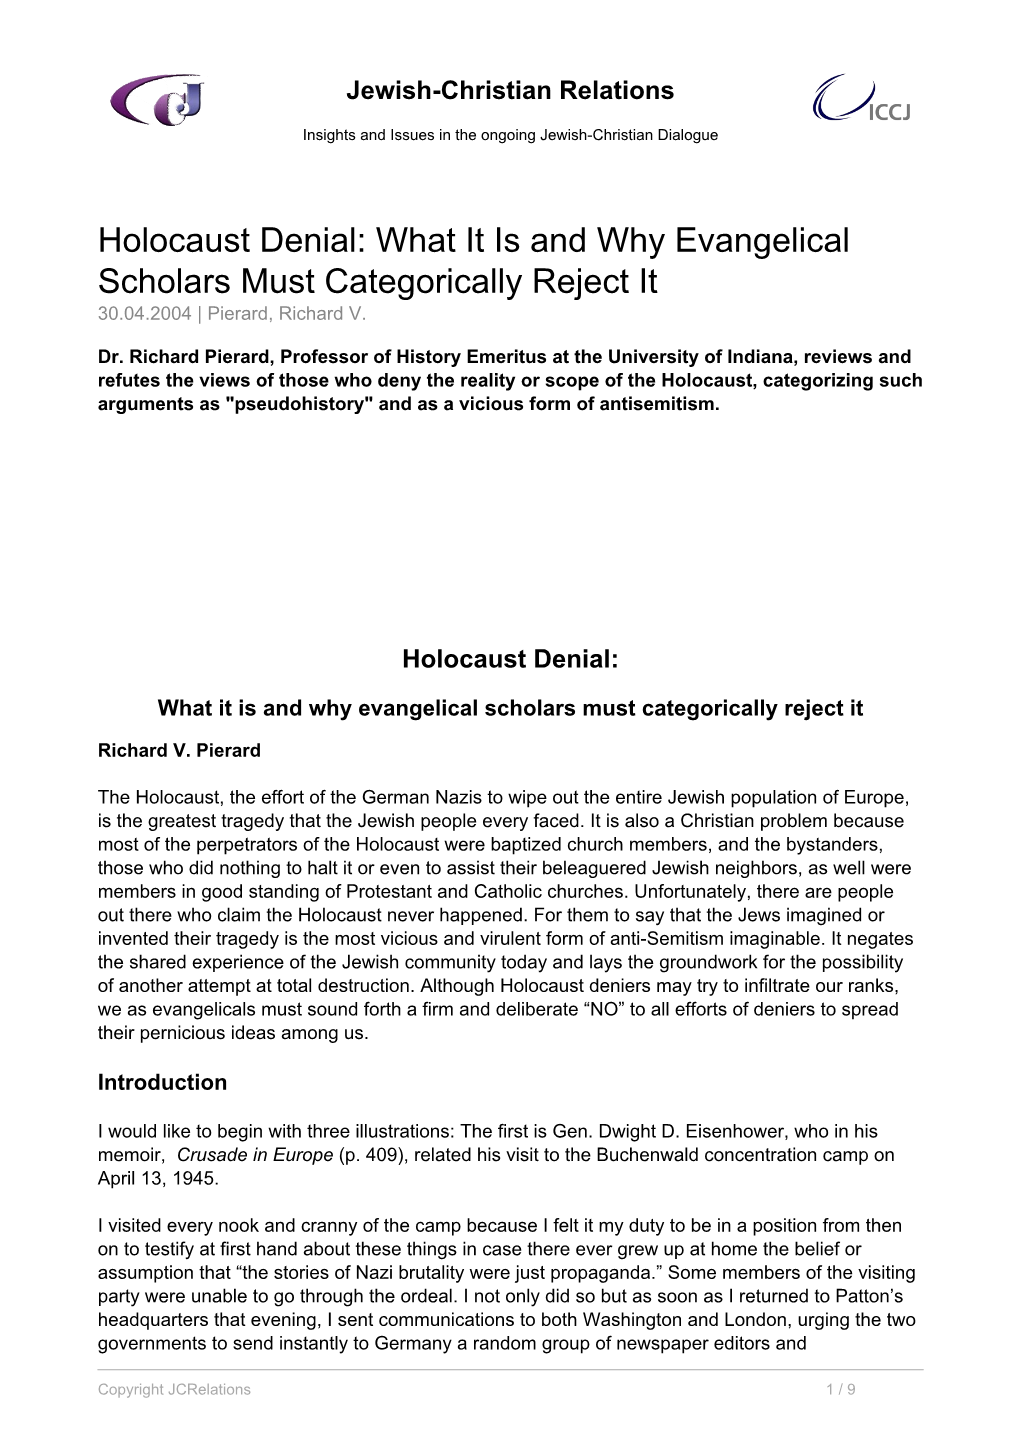 Holocaust Denial: What It Is and Why Evangelical Scholars Must Categorically Reject It 30.04.2004 | Pierard, Richard V